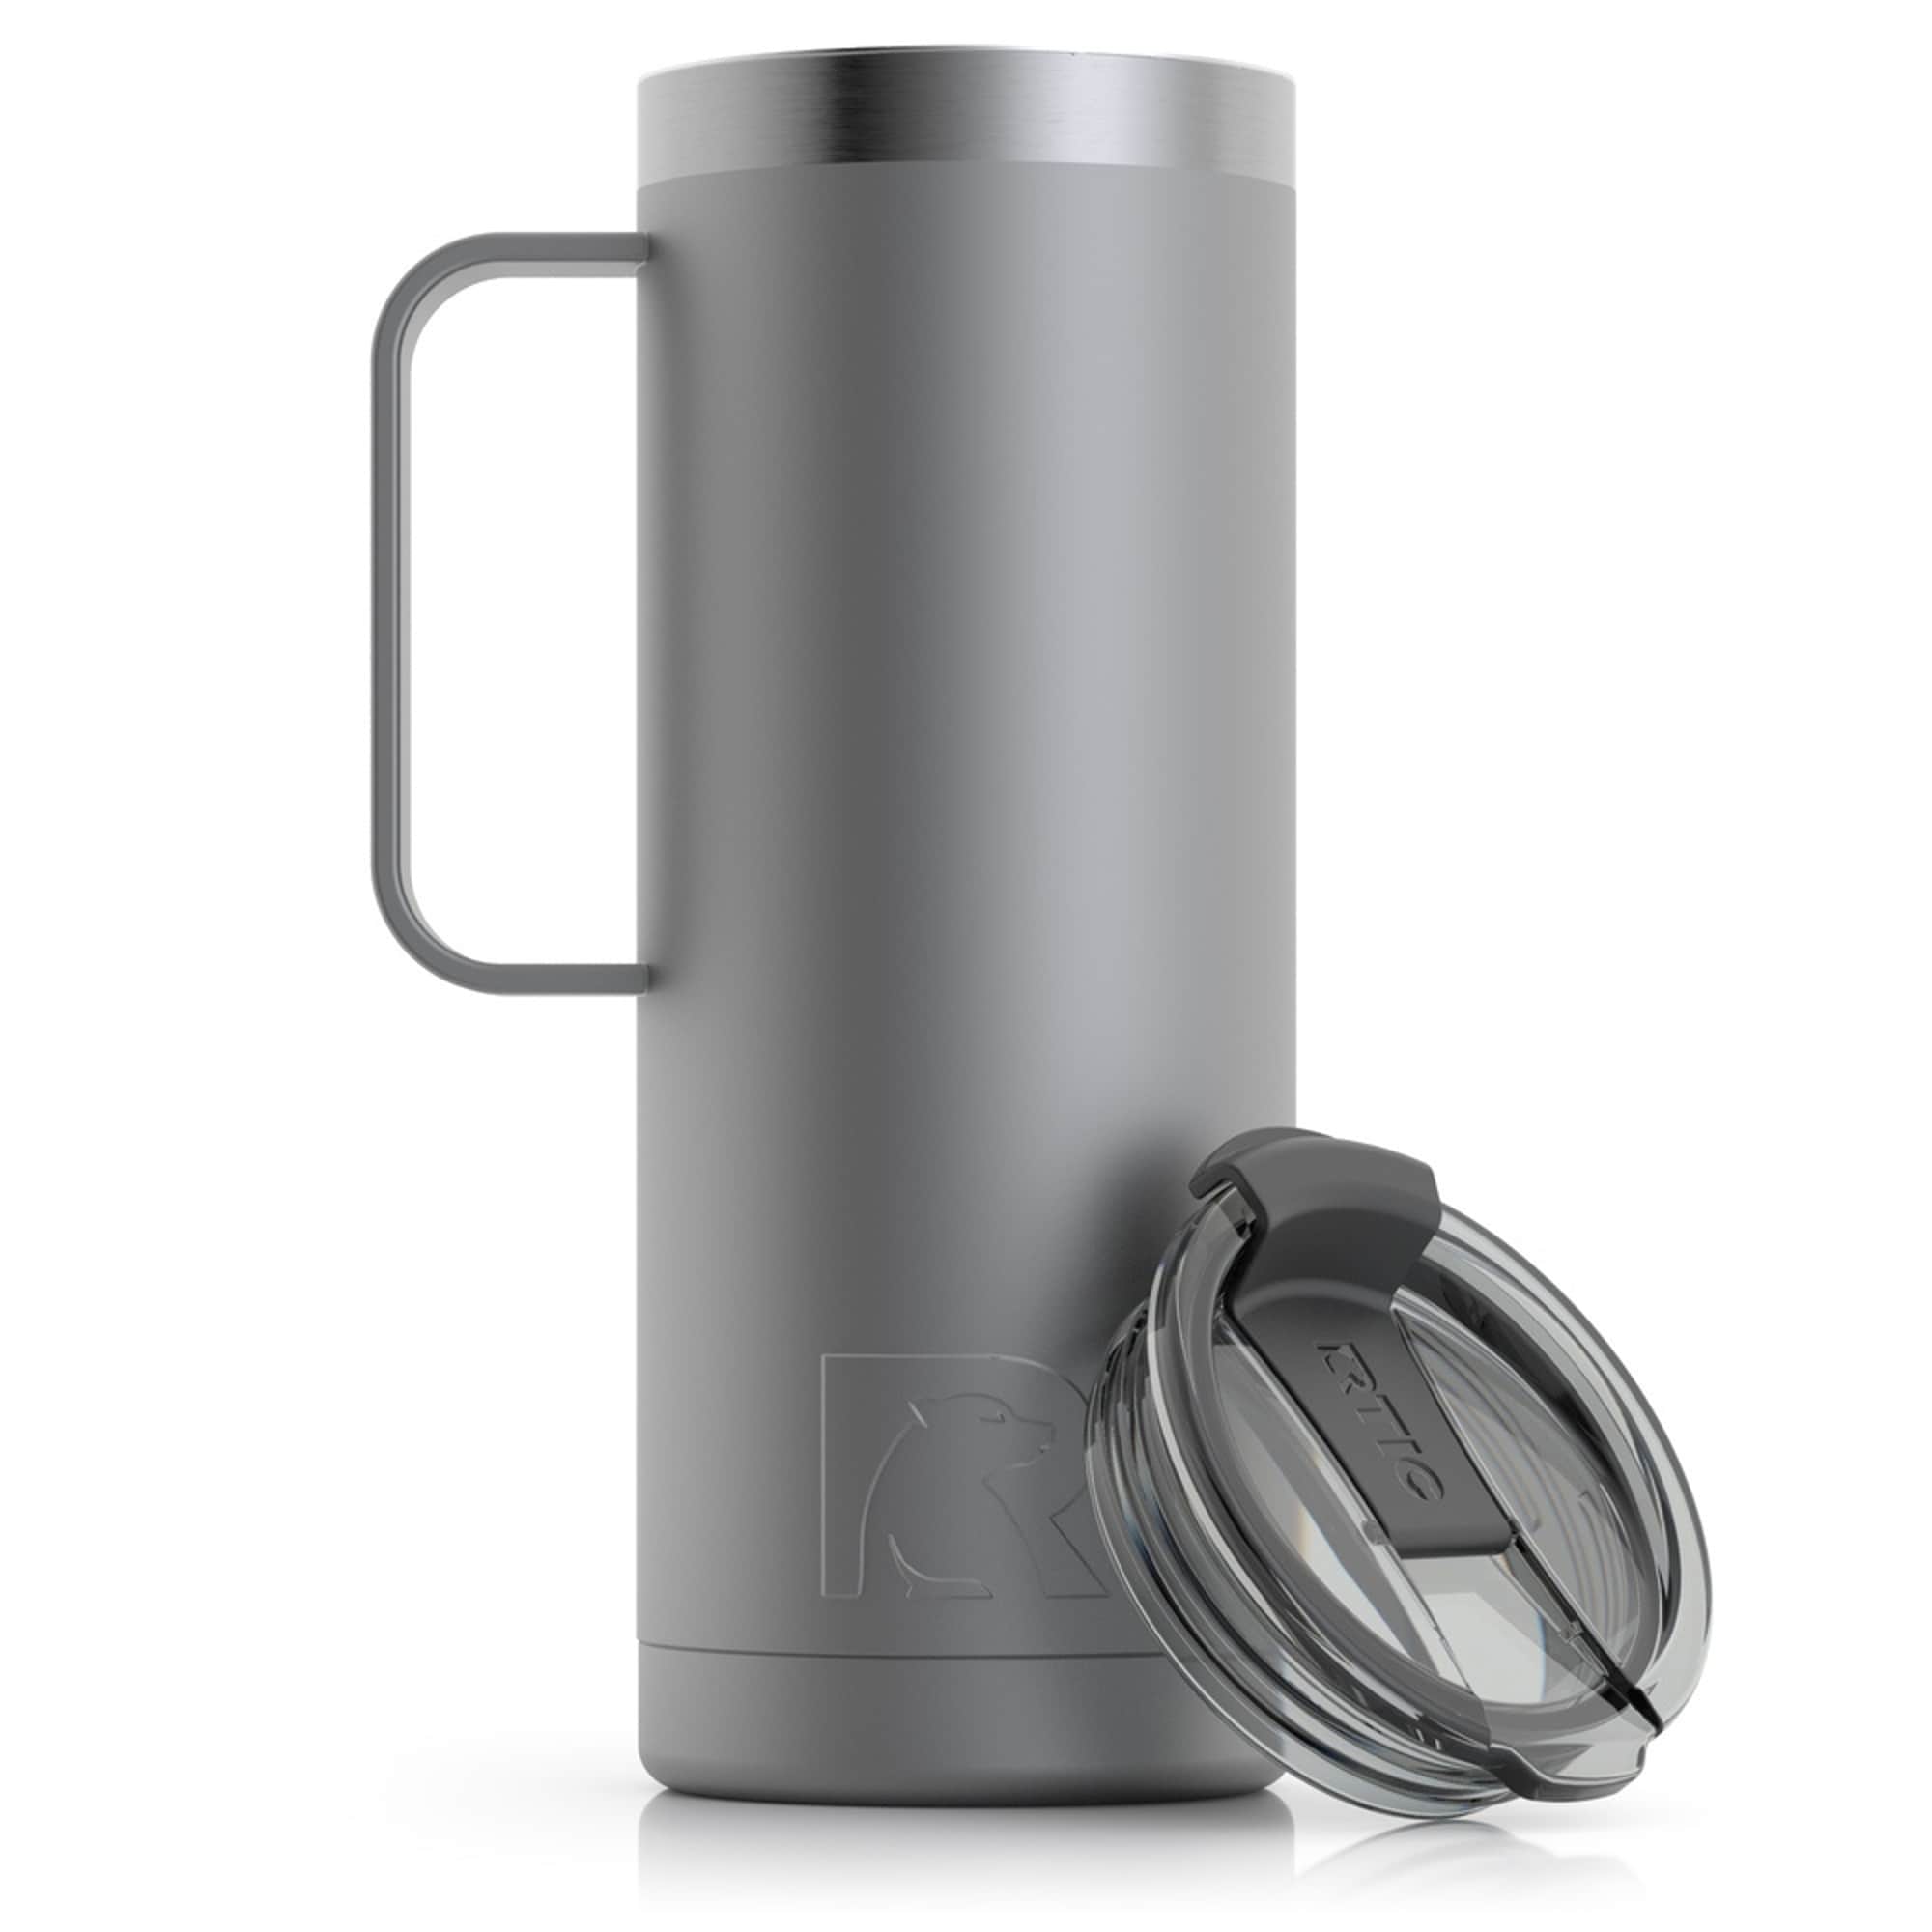 Insulated Stainless Steel Travel Mugs 16 oz. Set of 10, Bulk Pack - Perfect  for Coffee, Soda, Other Hot & Cold Beverages - Blue